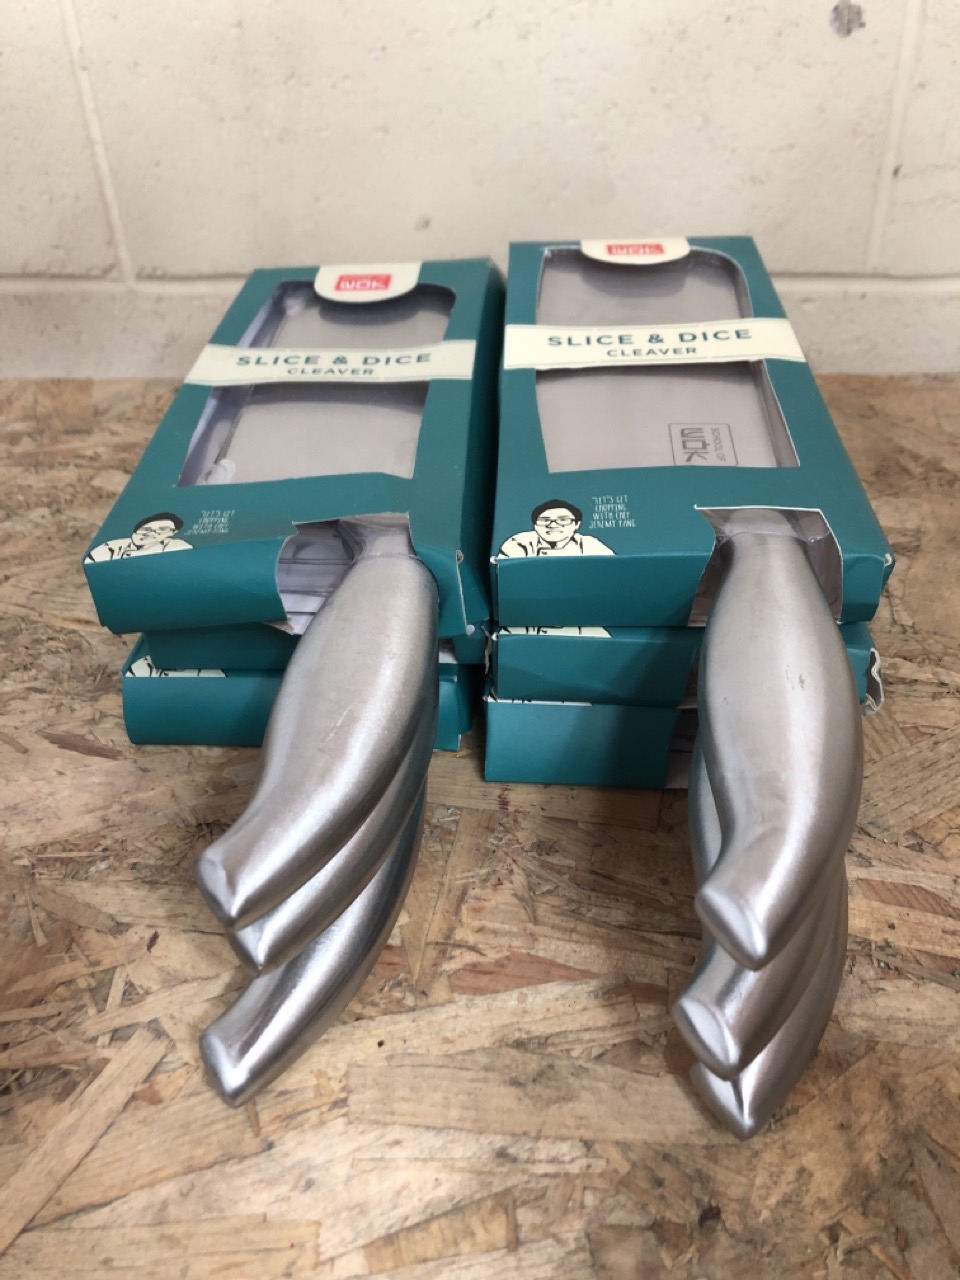 6 X SLICE AND DICE CLEAVER BY SCHOOL OF WOK - ID MAY BE REQUIRED - COLLECTION ONLY - LOCATION BACK RACK